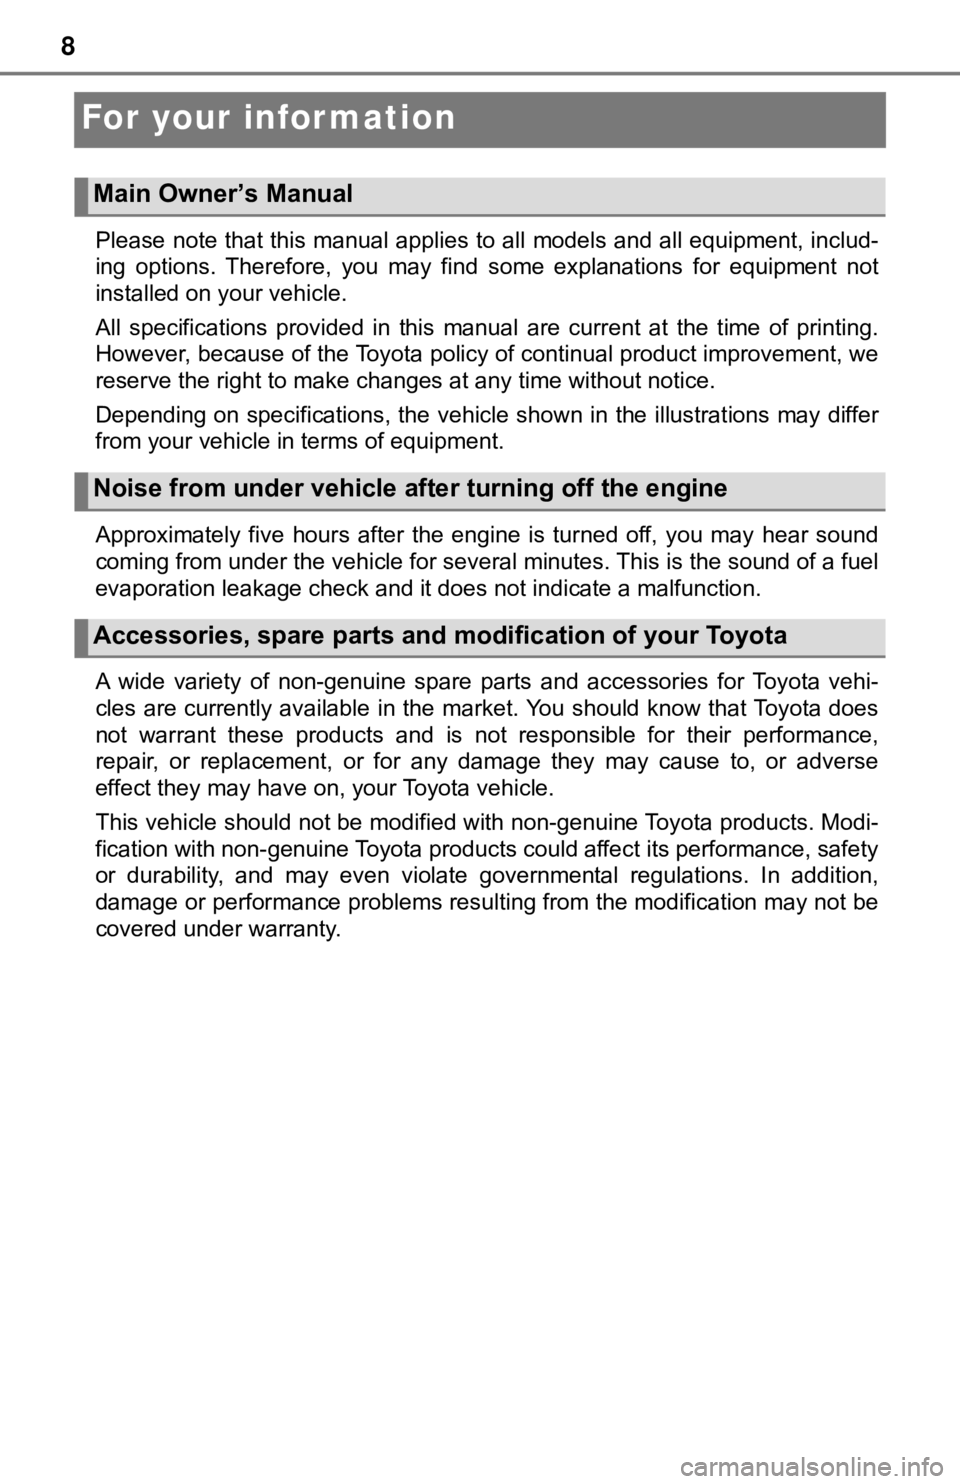 TOYOTA TACOMA 2018  Owners Manual (in English) 8
For your infor mation
Please note that this manual applies to all models and all equipment, includ-
ing  options.  Therefore,  you  may  find  some  explanations  for  equi pment  not
installed on y